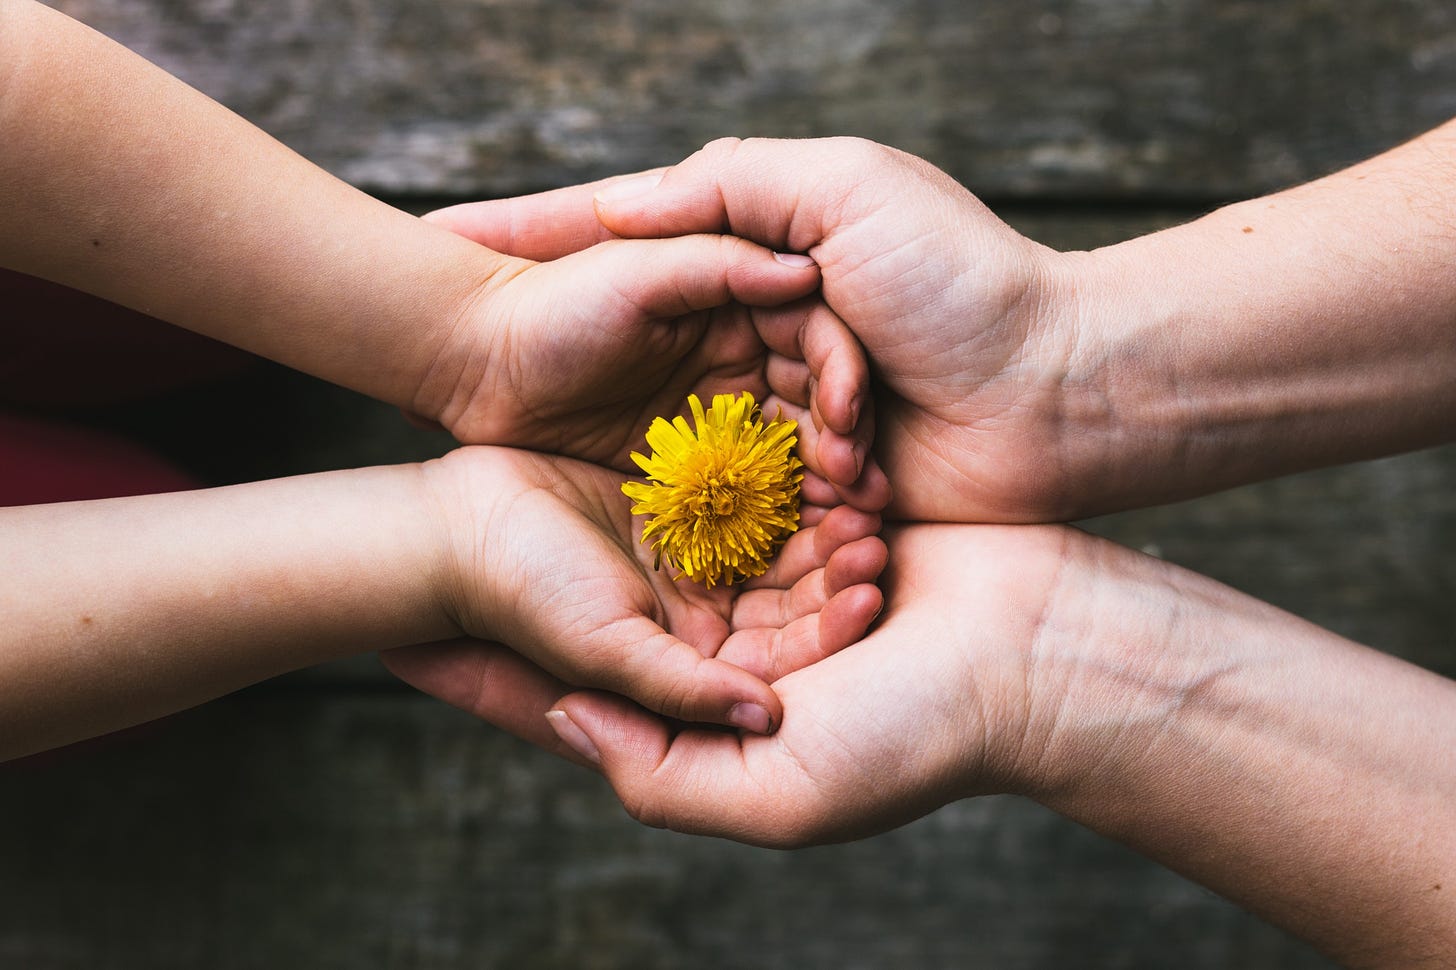 A parent holds the hands of their child inside their own. At the center is a single yellow daisy.